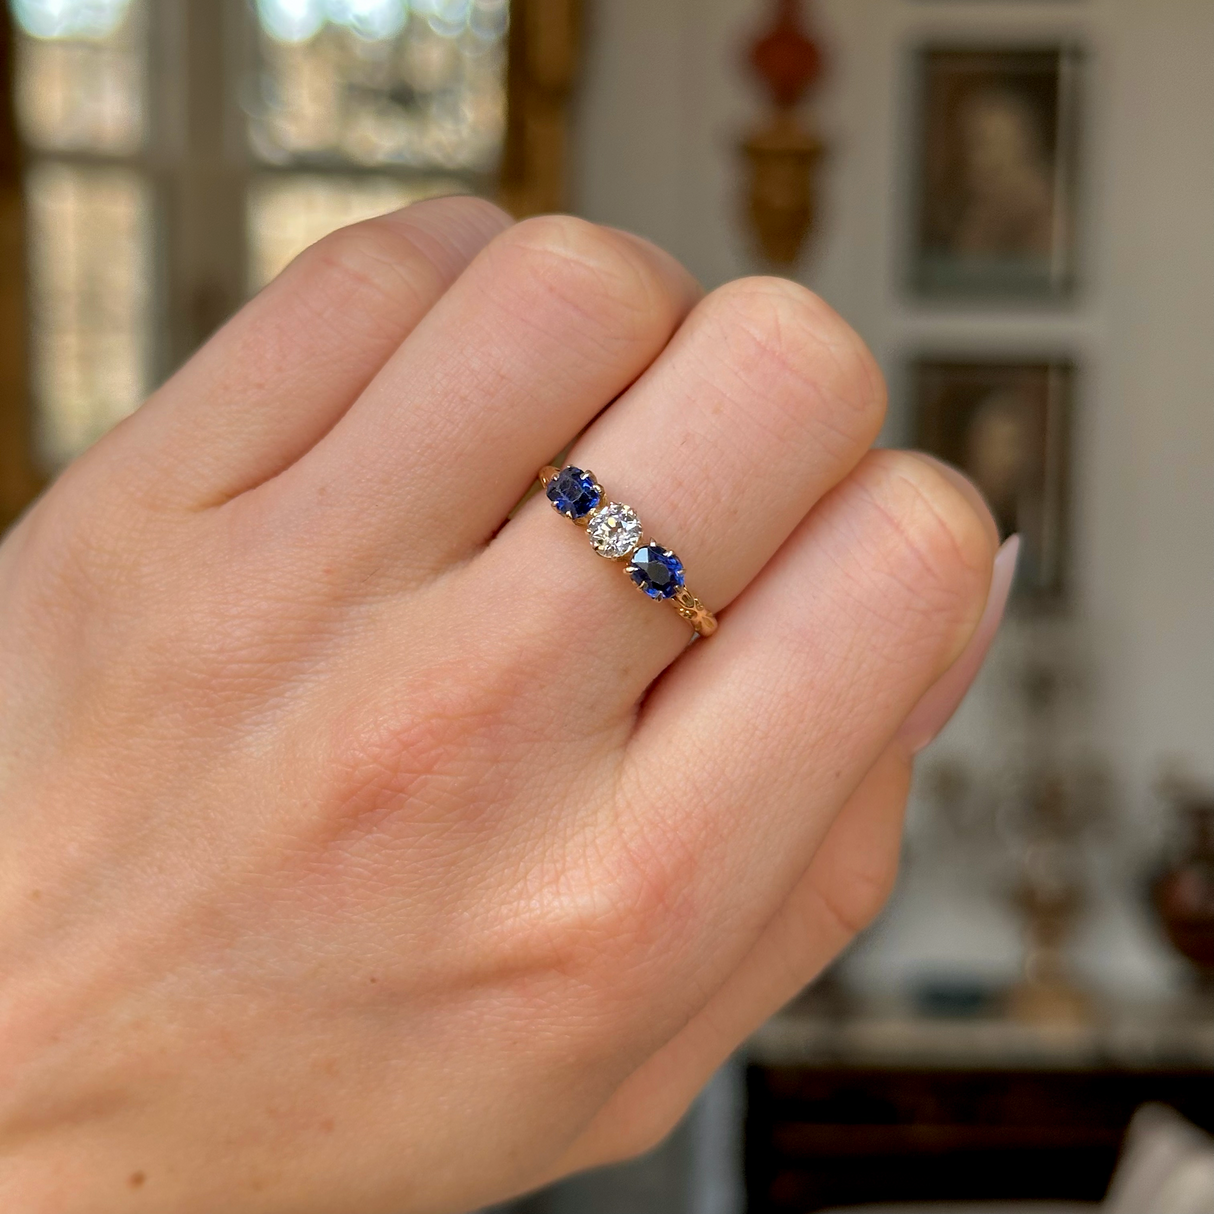 Antique, Edwardian Diamond and Sapphire Engagement Ring, 18ct Yellow Gold worn on closed hand. 